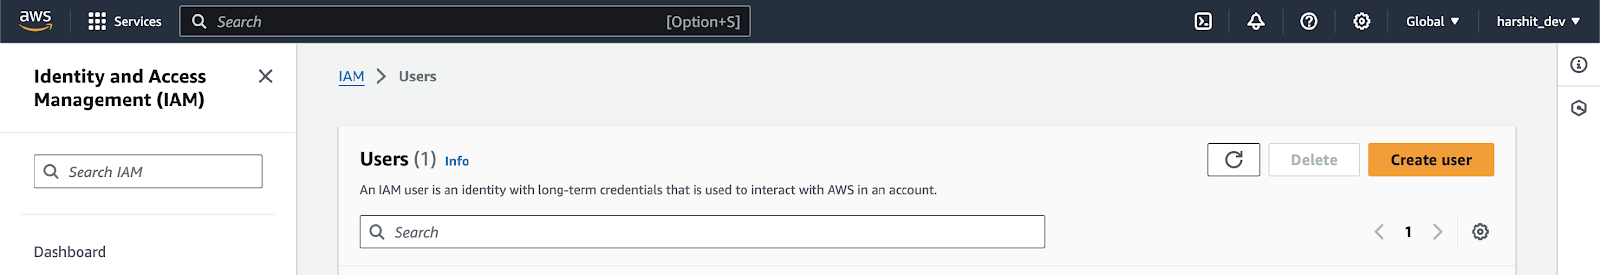 Deploying an LLM App to AWS using Open Source Tools